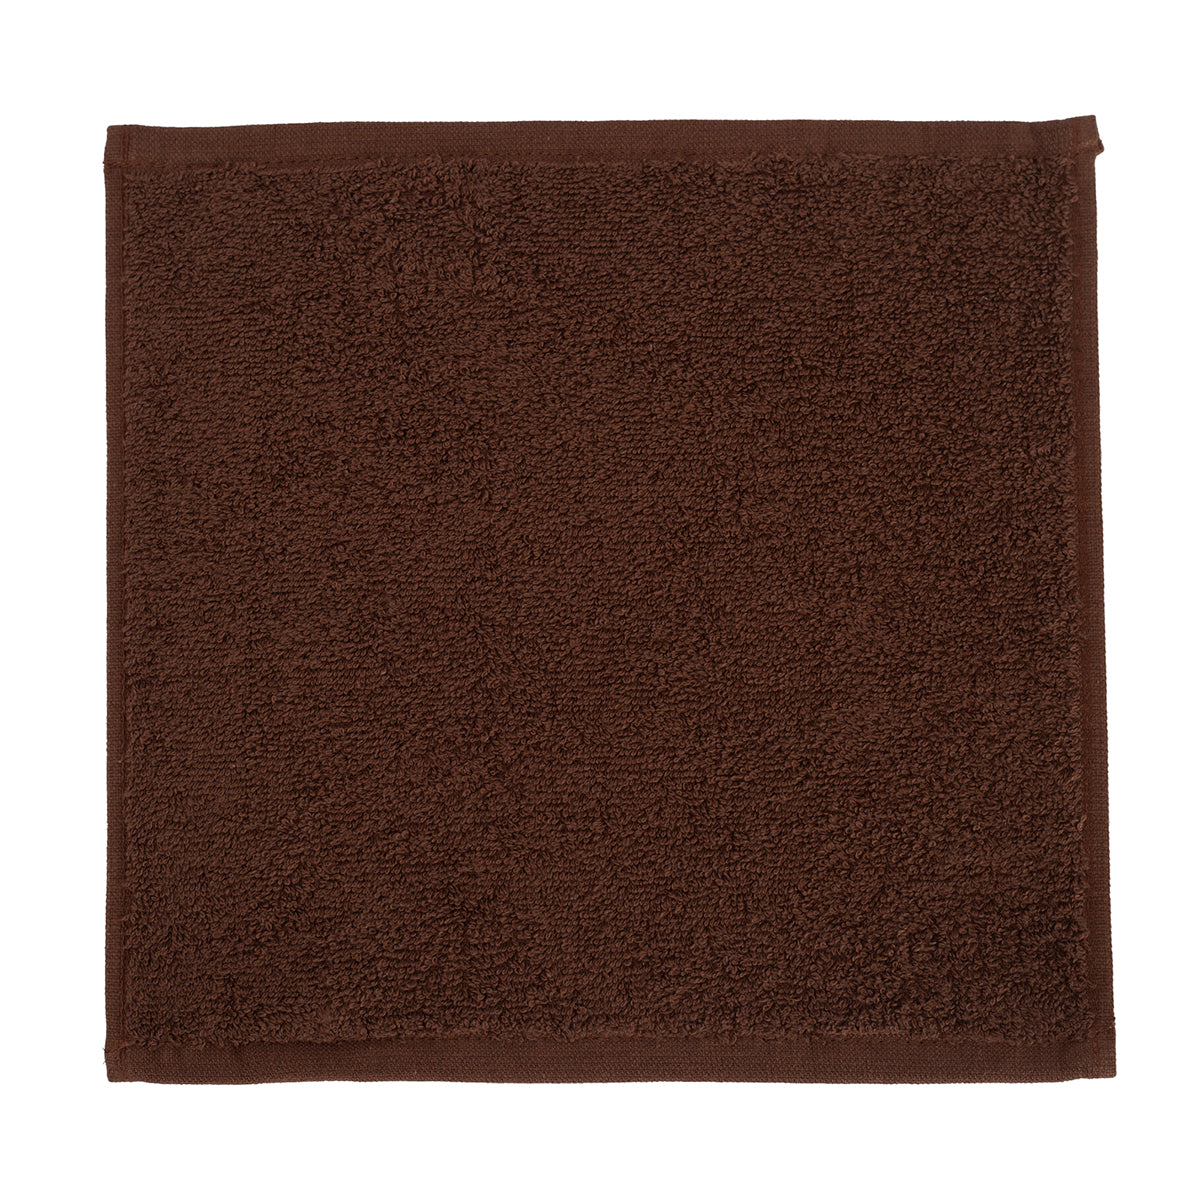 Jeneth Ultra-Soft and Highly Absorbent Cocoa Brown Face Towel Set